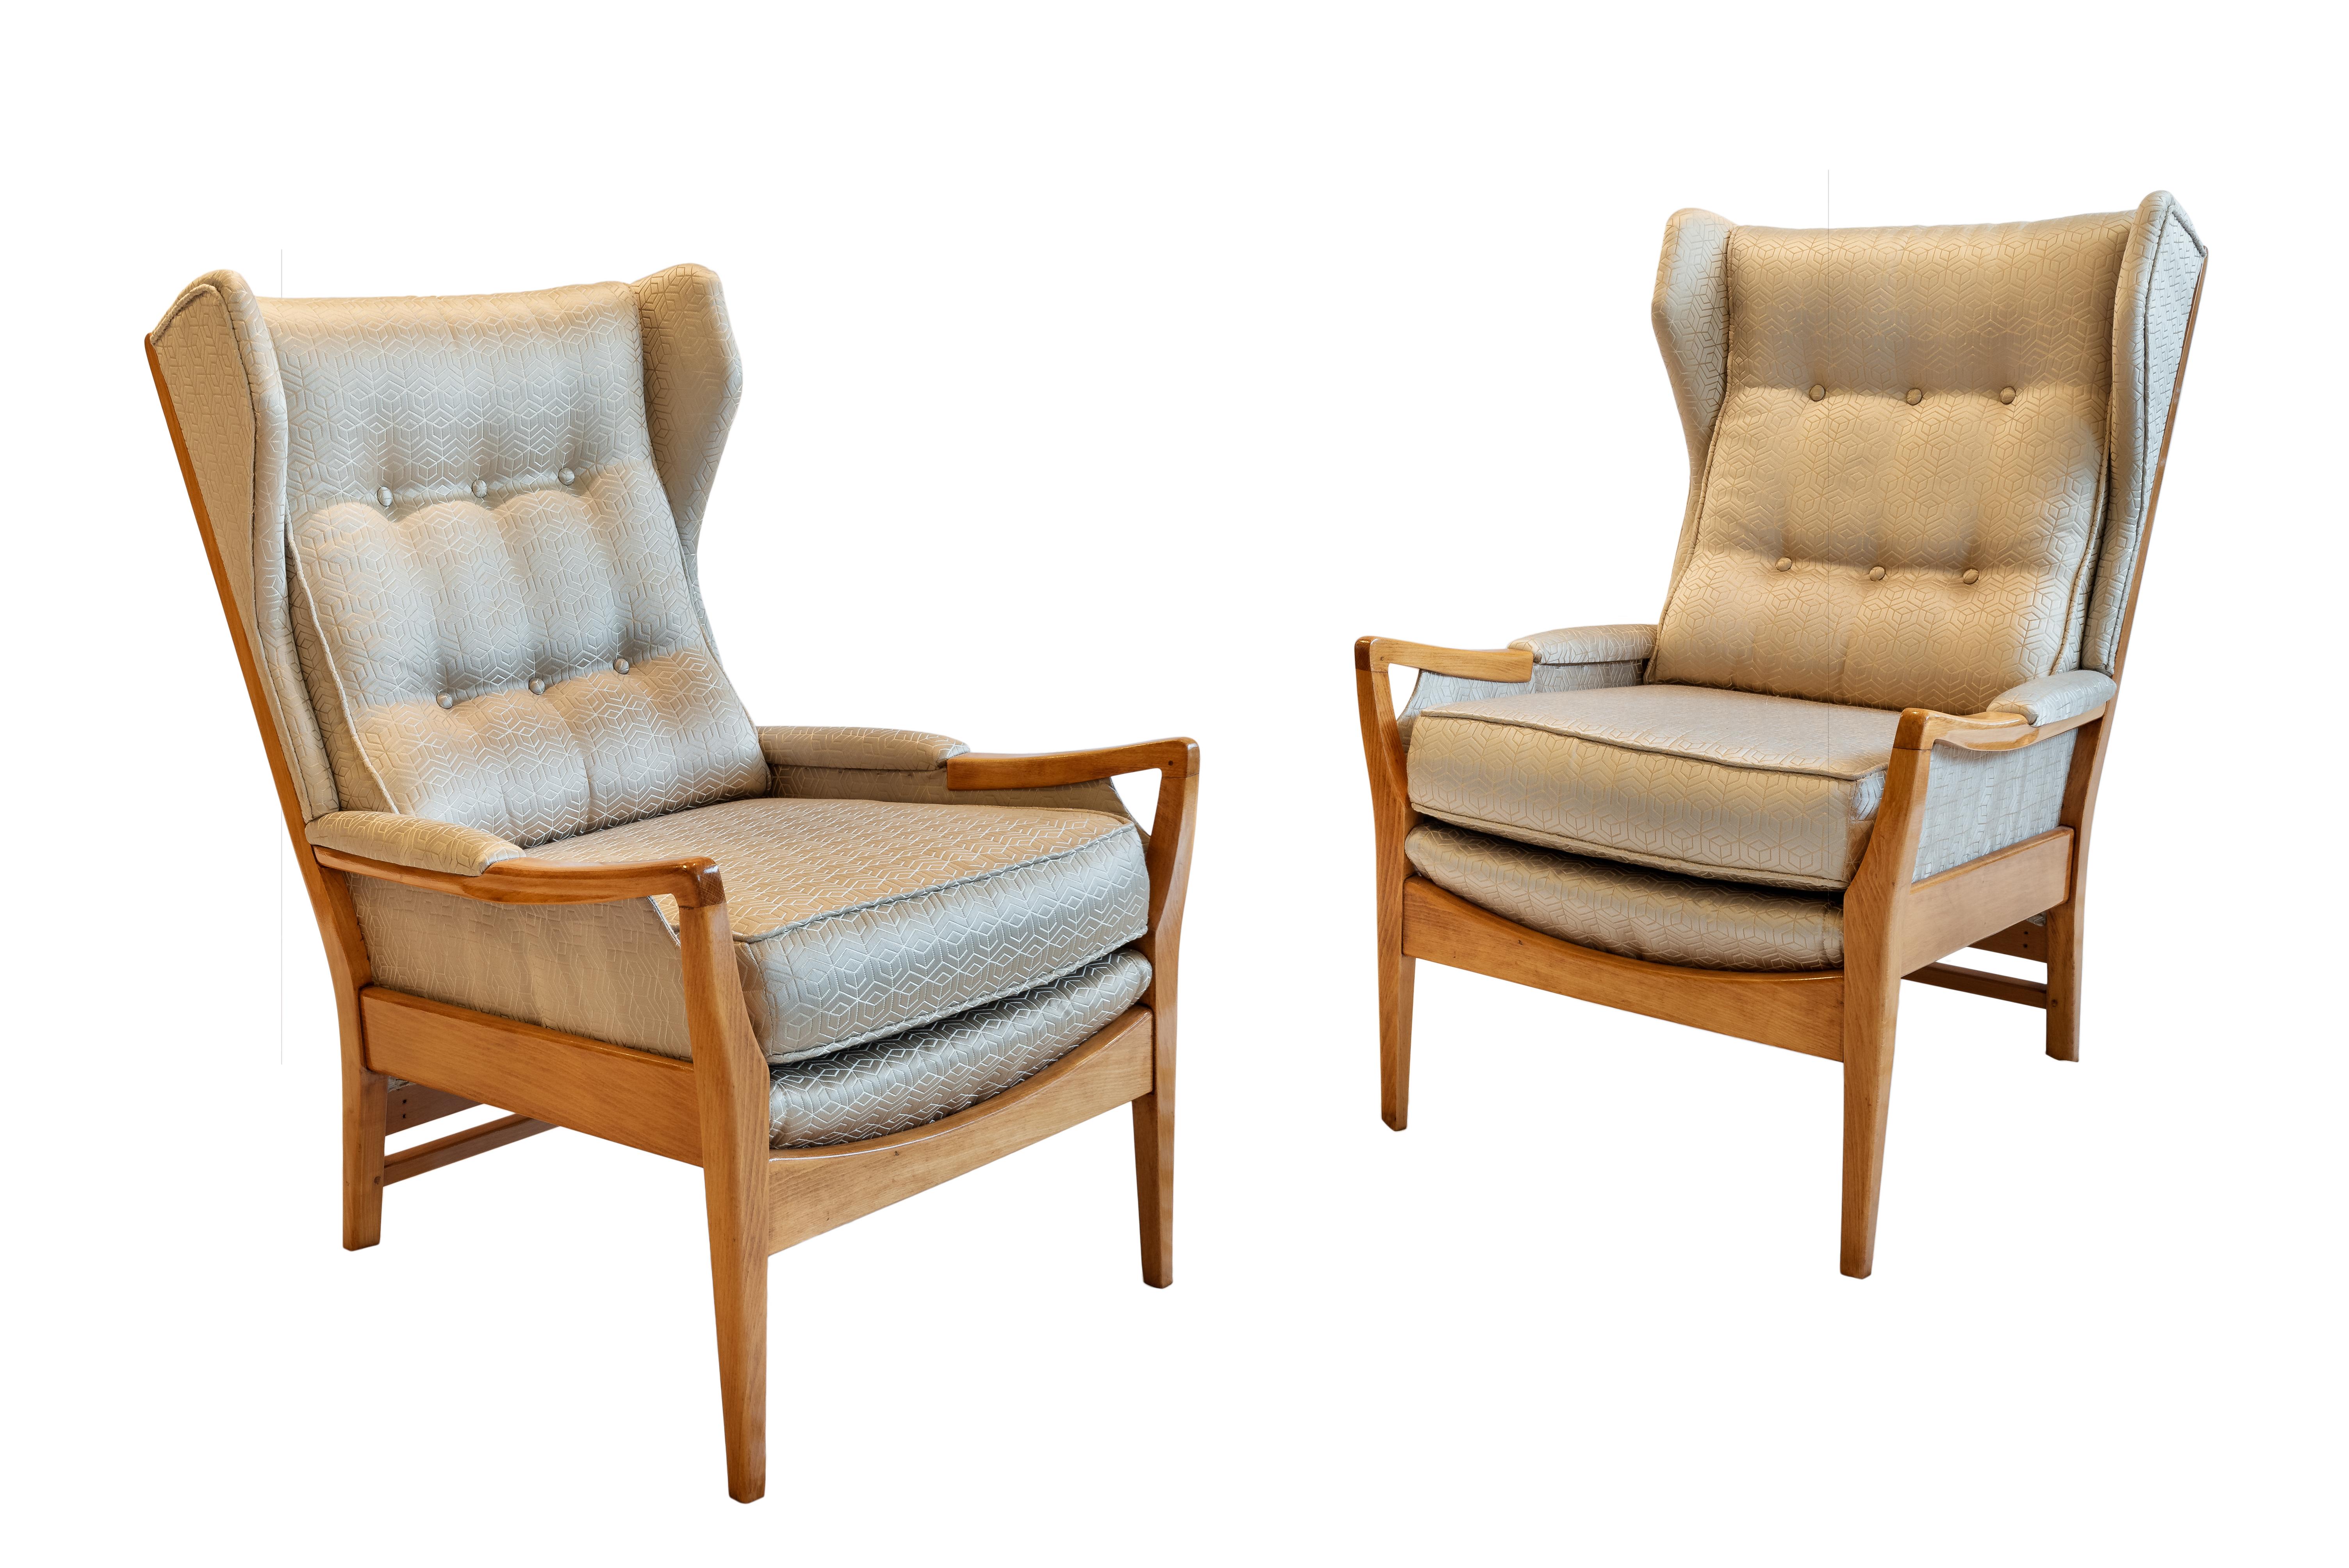 Swedish Mid-Century Modern Pair of Wingback Teak Chairs Attributed to Arne Norell